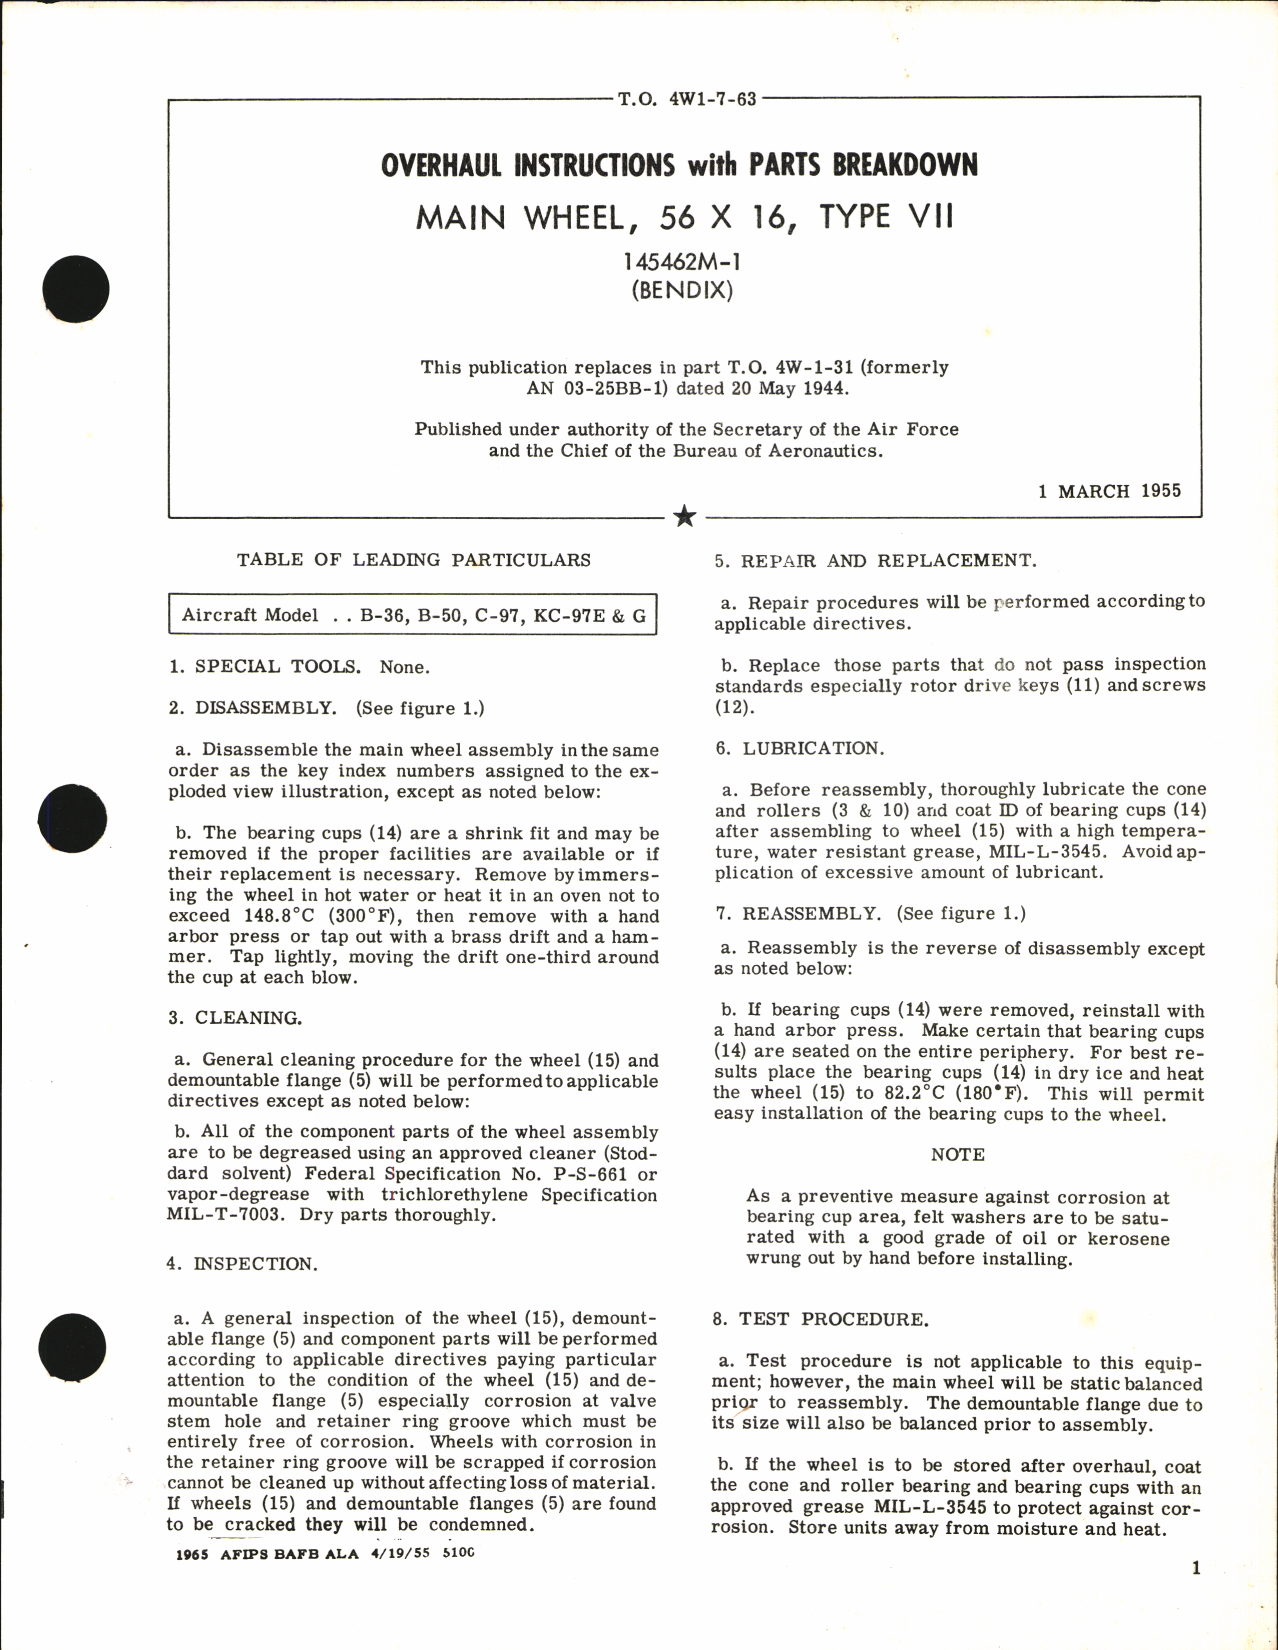 Sample page 1 from AirCorps Library document: Overhaul Instructions with Parts Breakdown for Main Wheel 56 x 16, Type VII